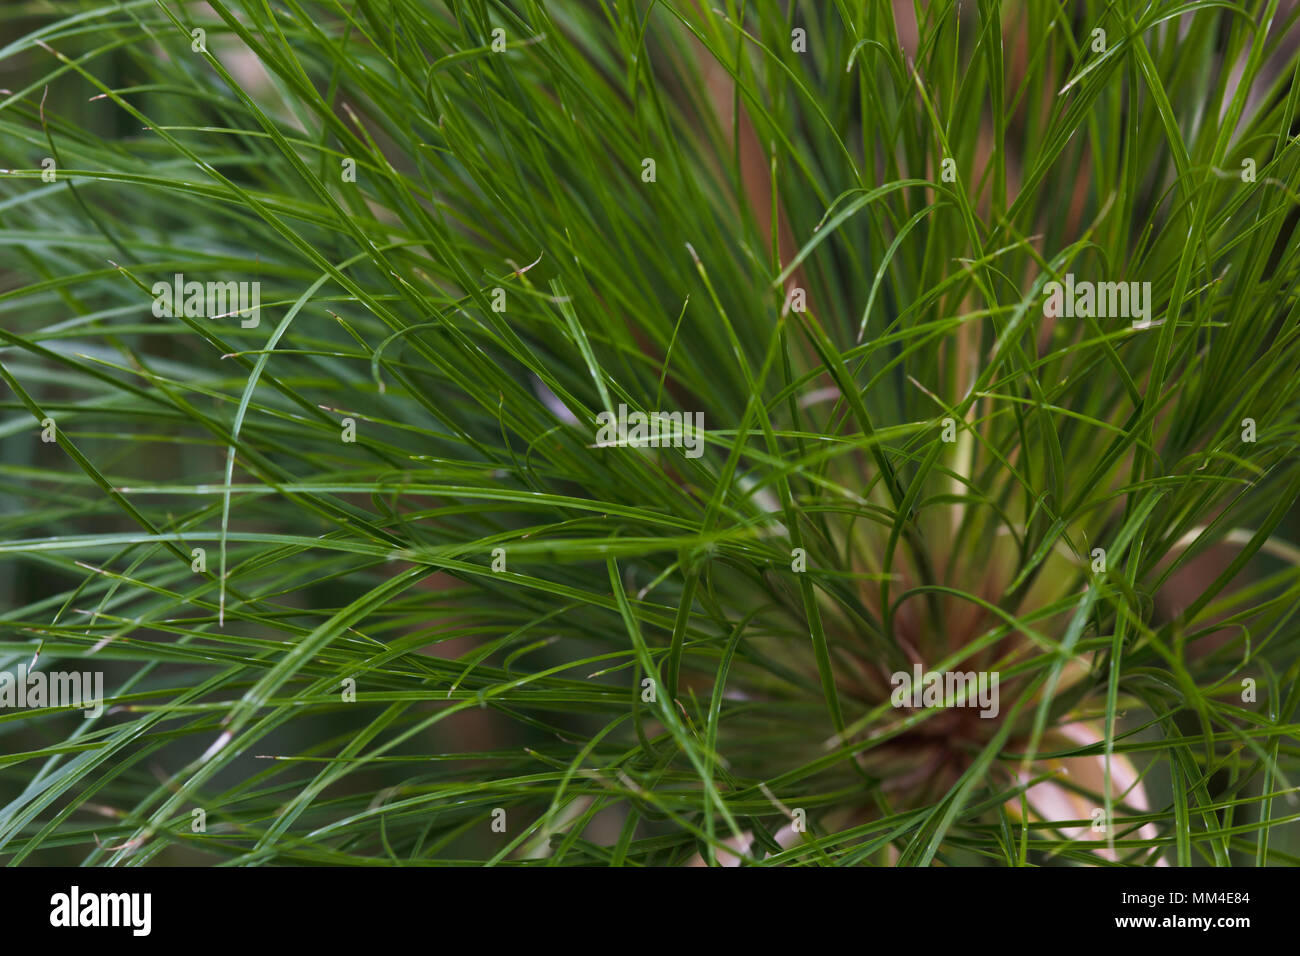 Thin Green Nile Grass Leaves (cyperus papyrus) Stock Photo